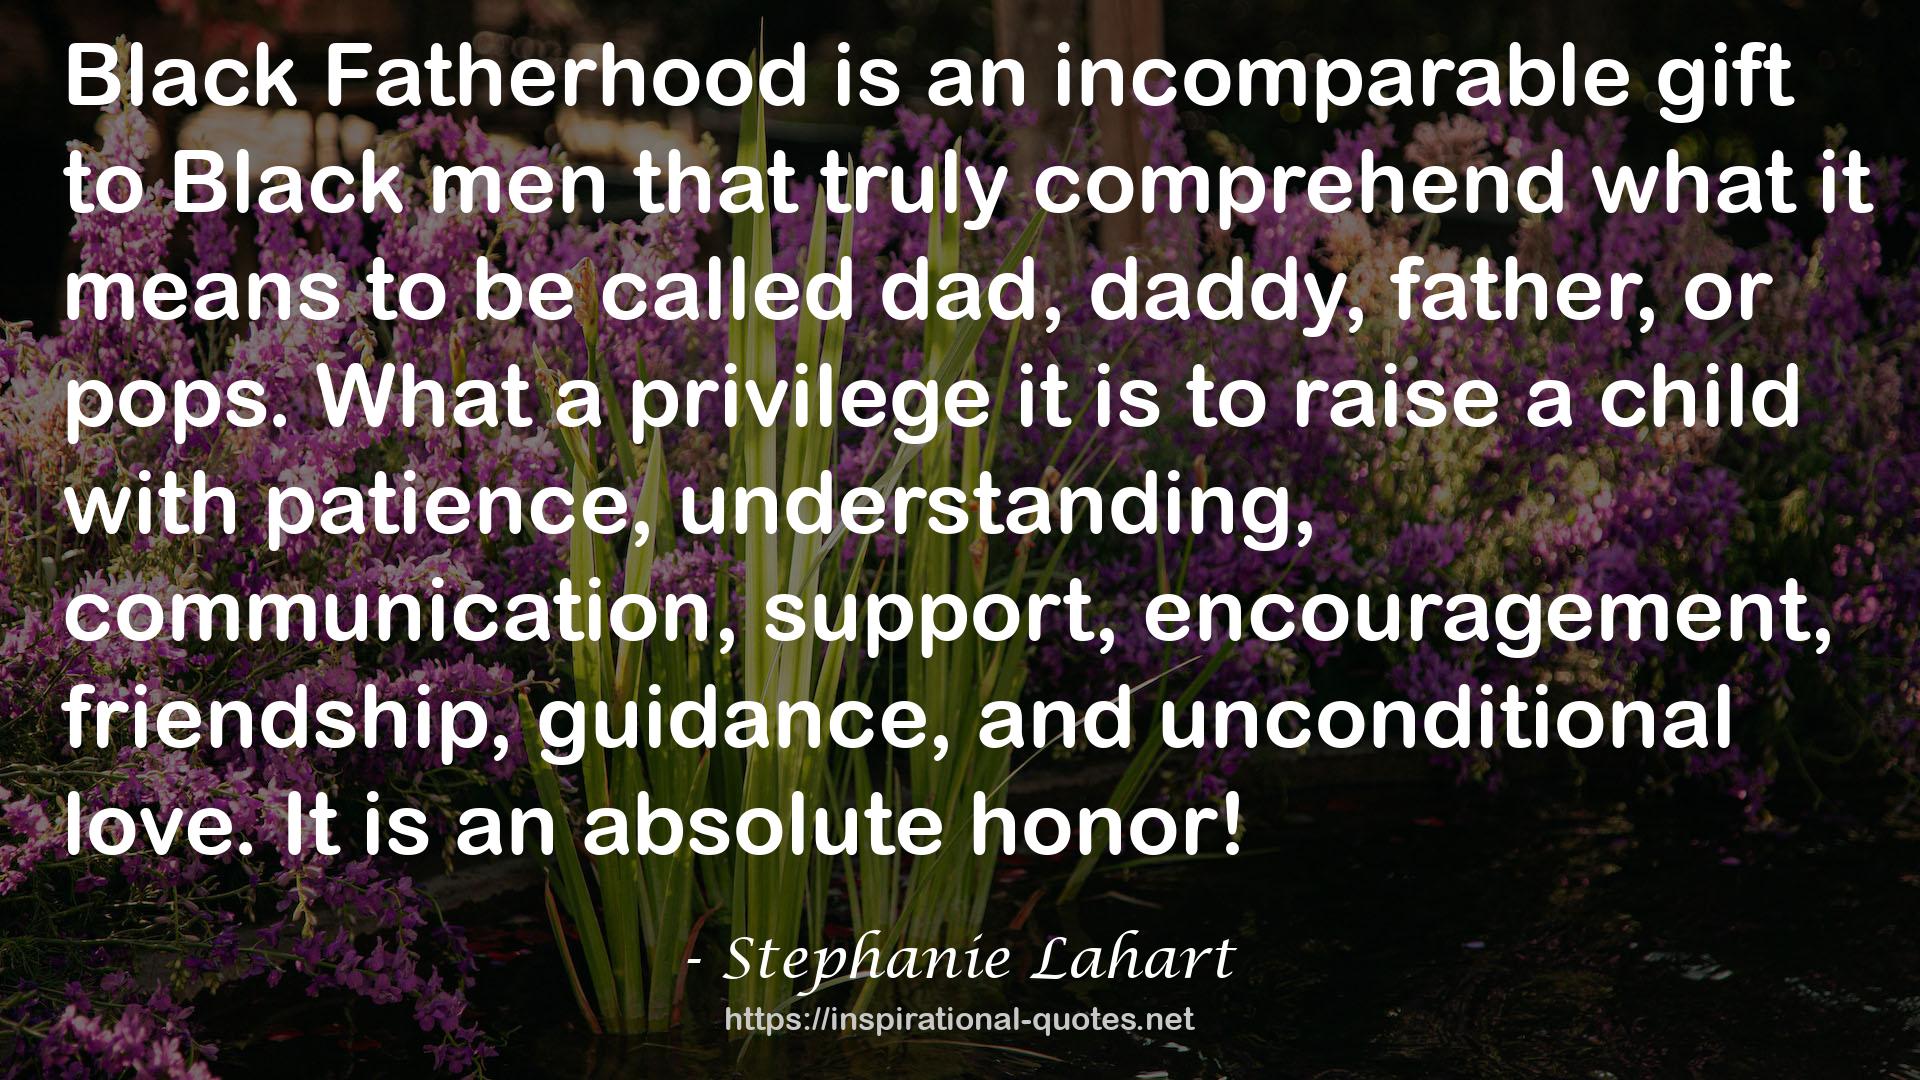 Stephanie Lahart quote : Black Fatherhood is an incomparable gift to Black men that truly comprehend what it means to be called dad, daddy, father, or pops. What a privilege it is to raise a child with patience, understanding, communication, support, encouragement, friendship, guidance, and unconditional love. It is an absolute honor!